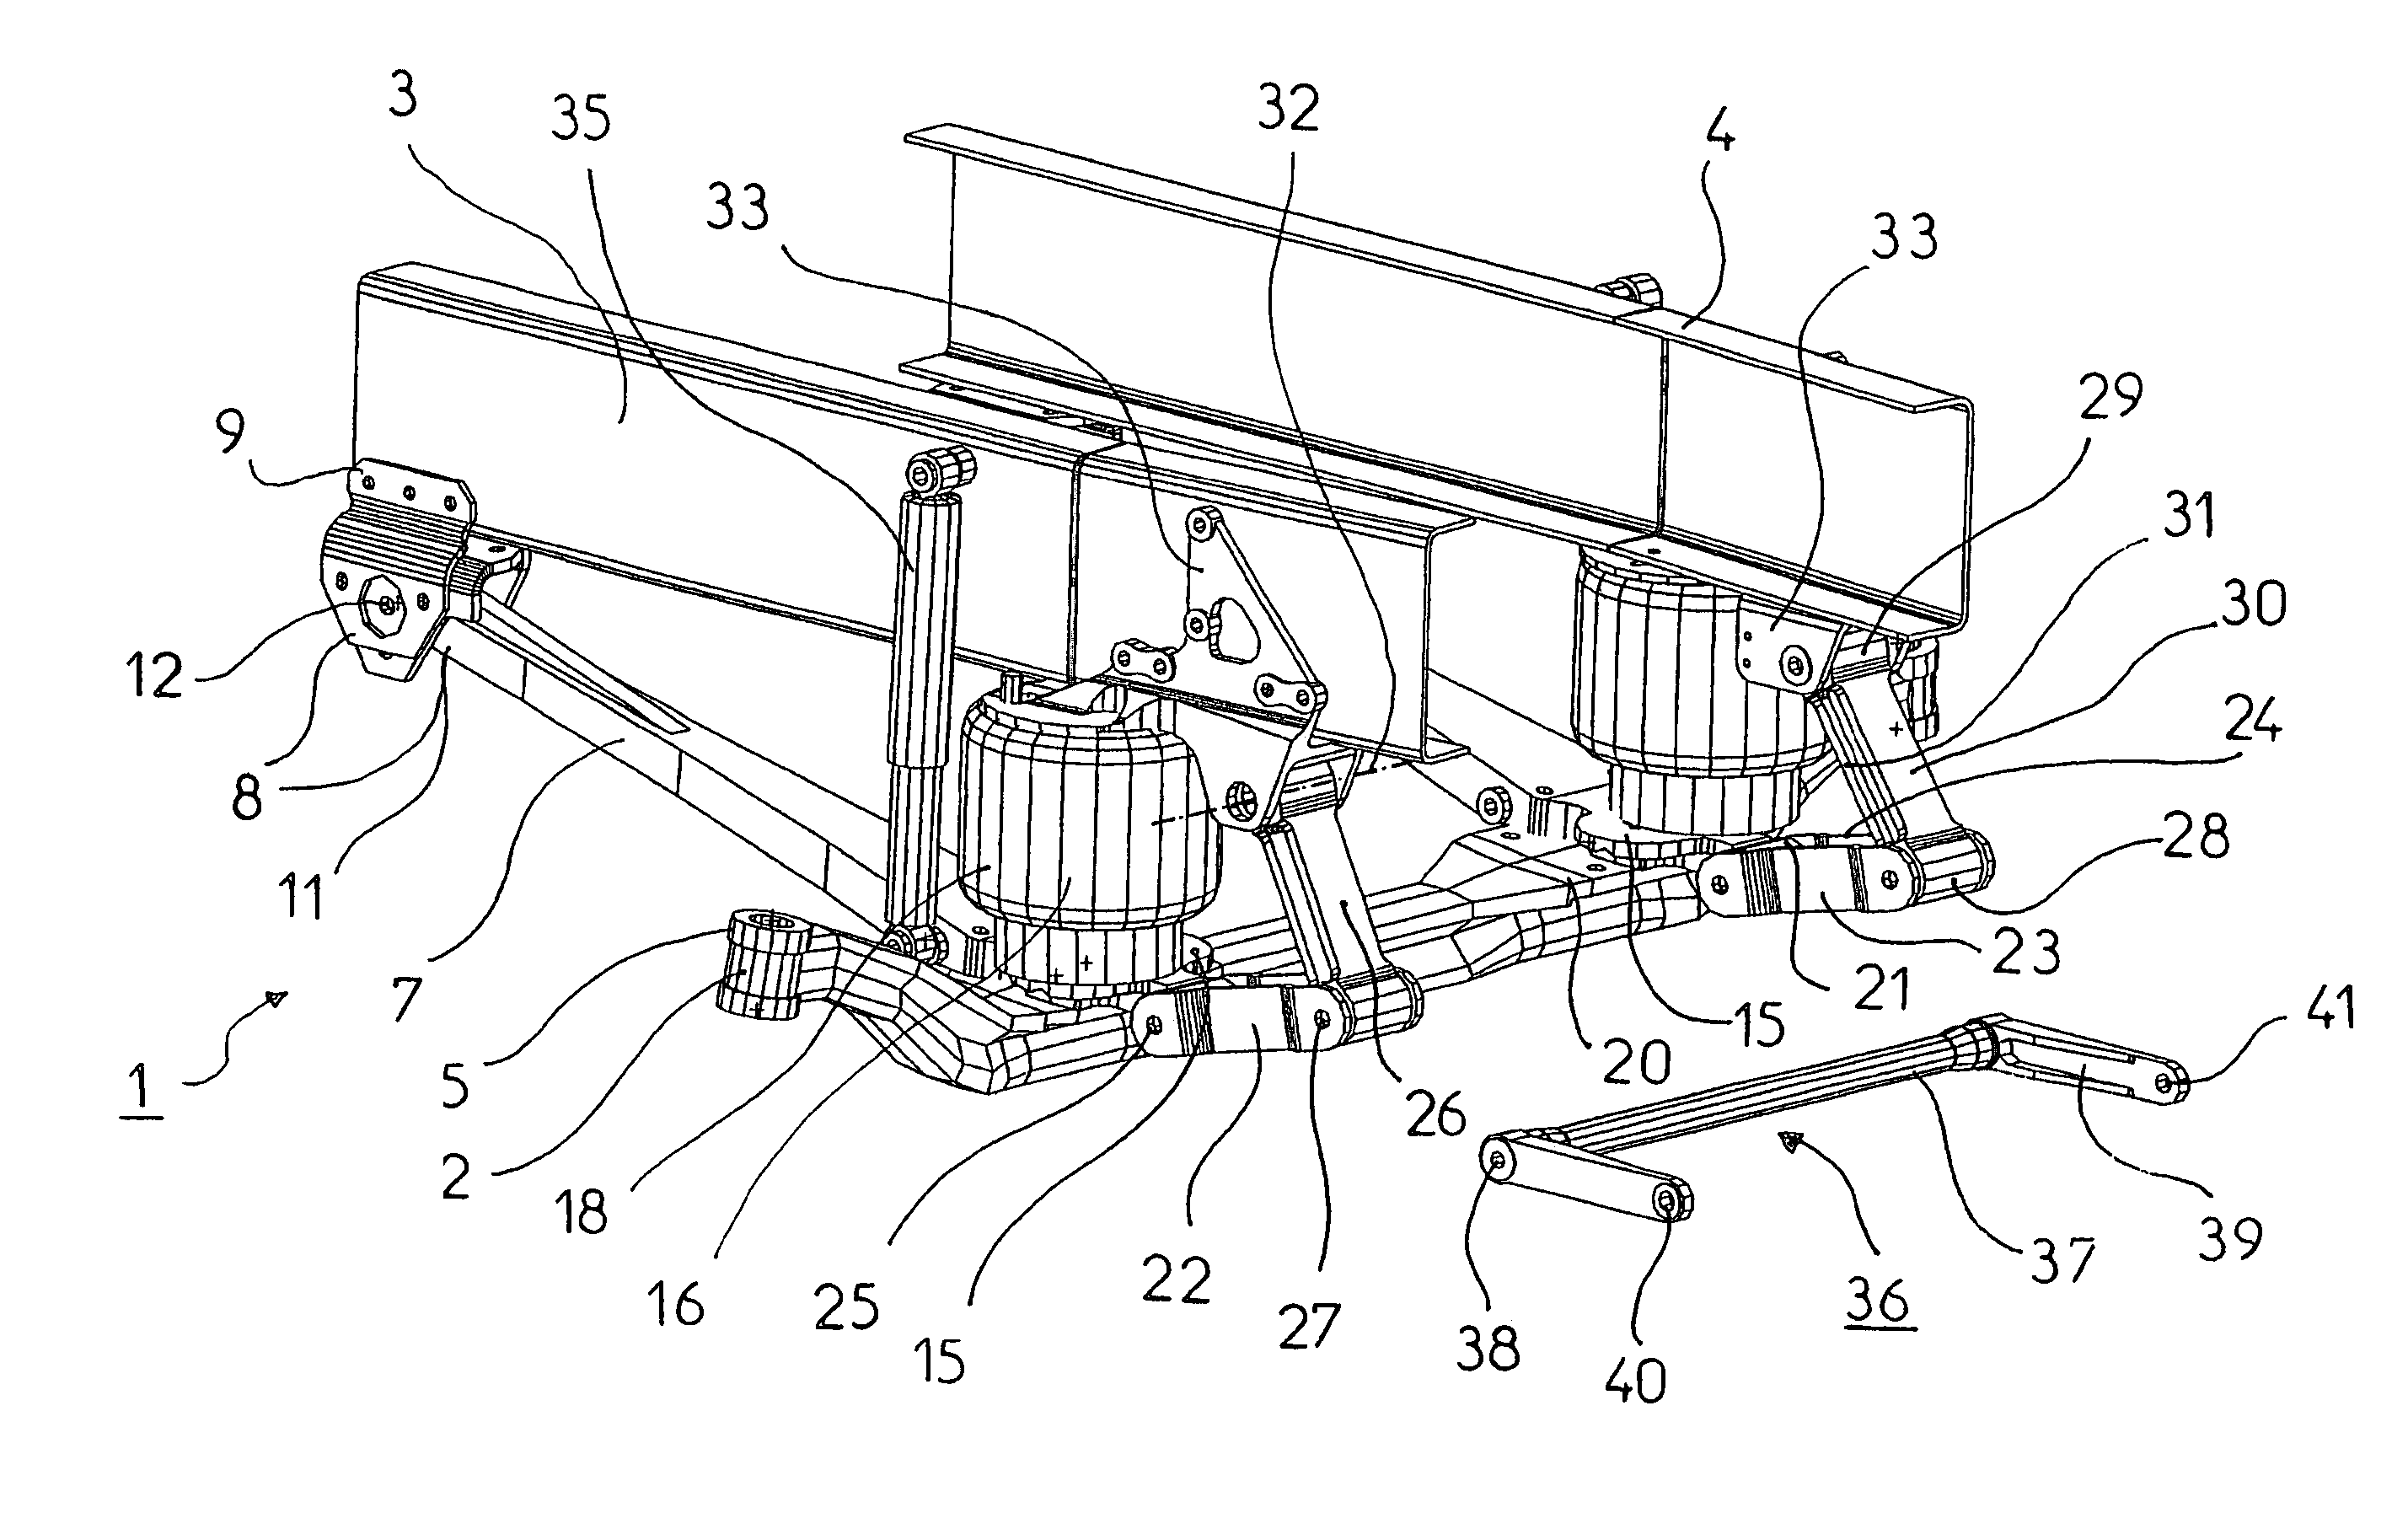 Pneumatic front suspension assembly for industrial vehicle